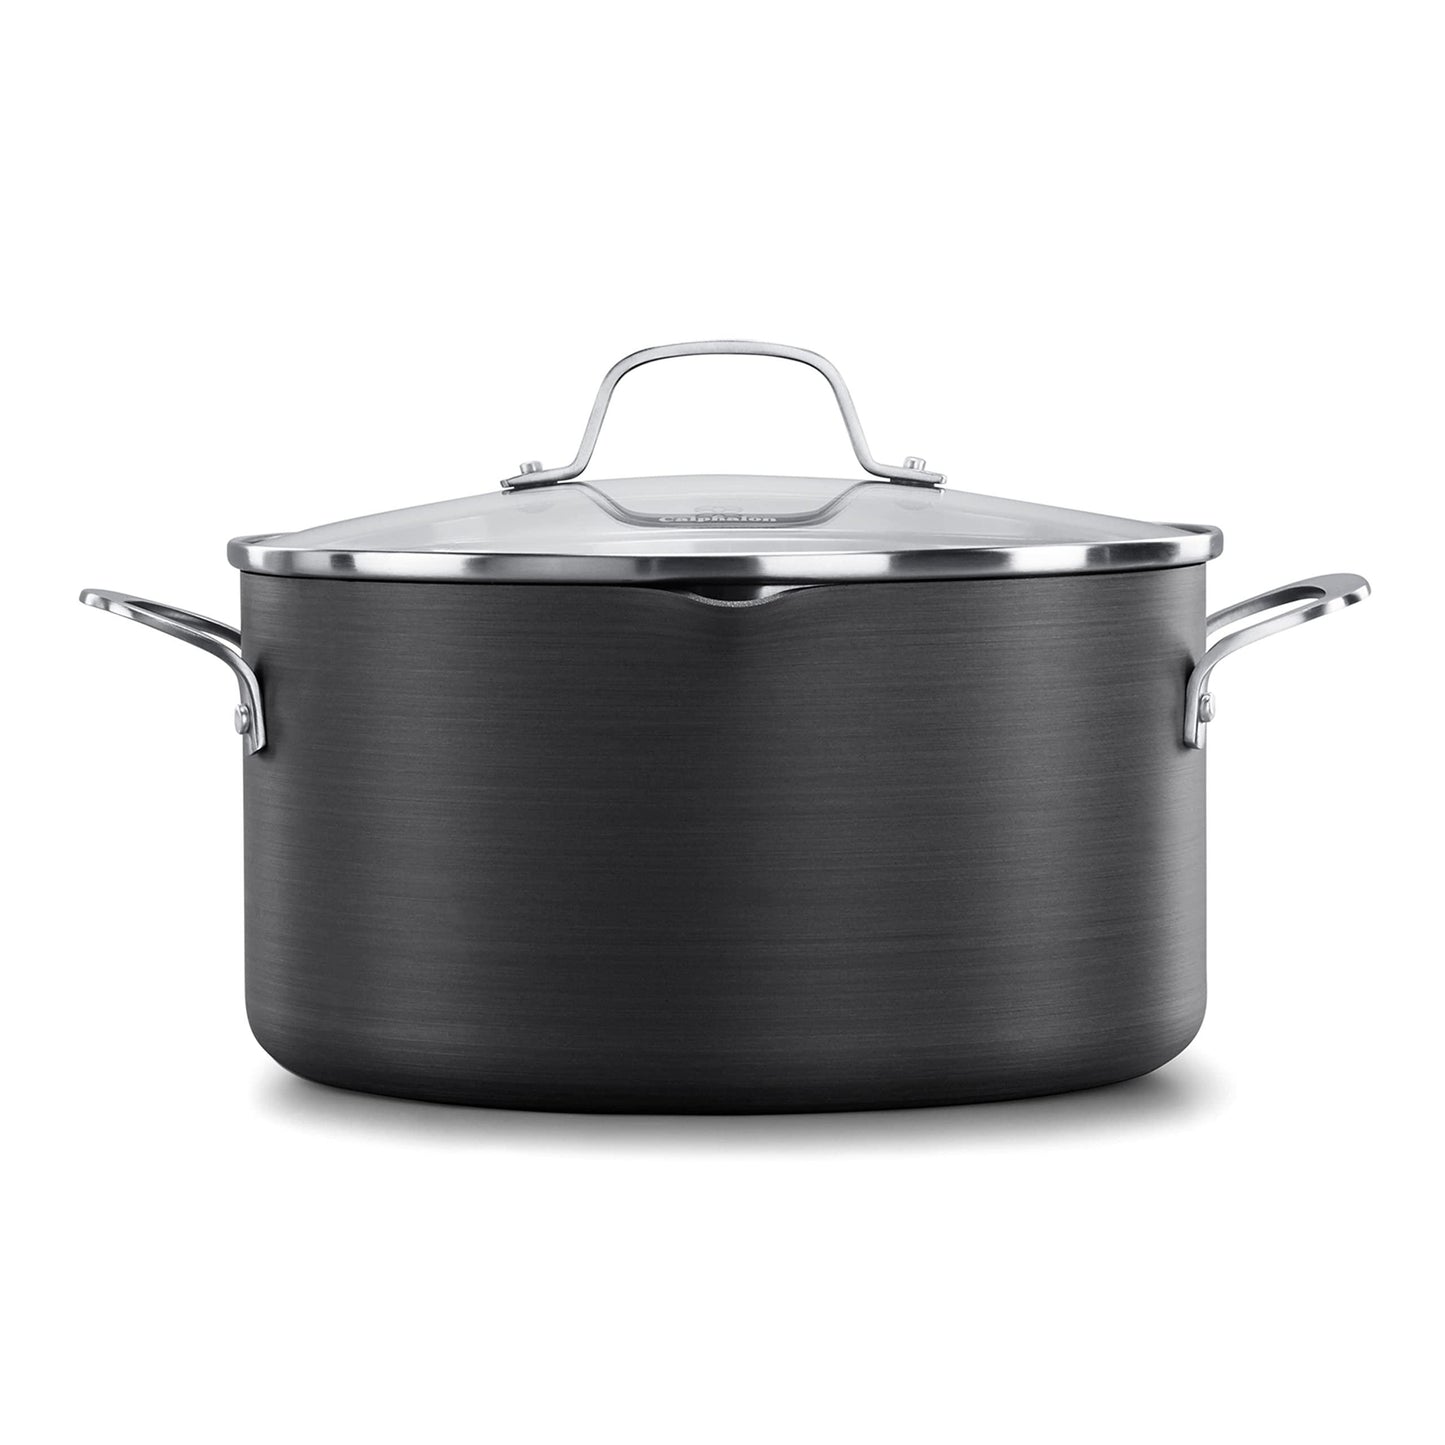 Calphalon Classic Hard-Anodized Nonstick Cookware, 7-Quart Dutch Oven with Lid - CookCave